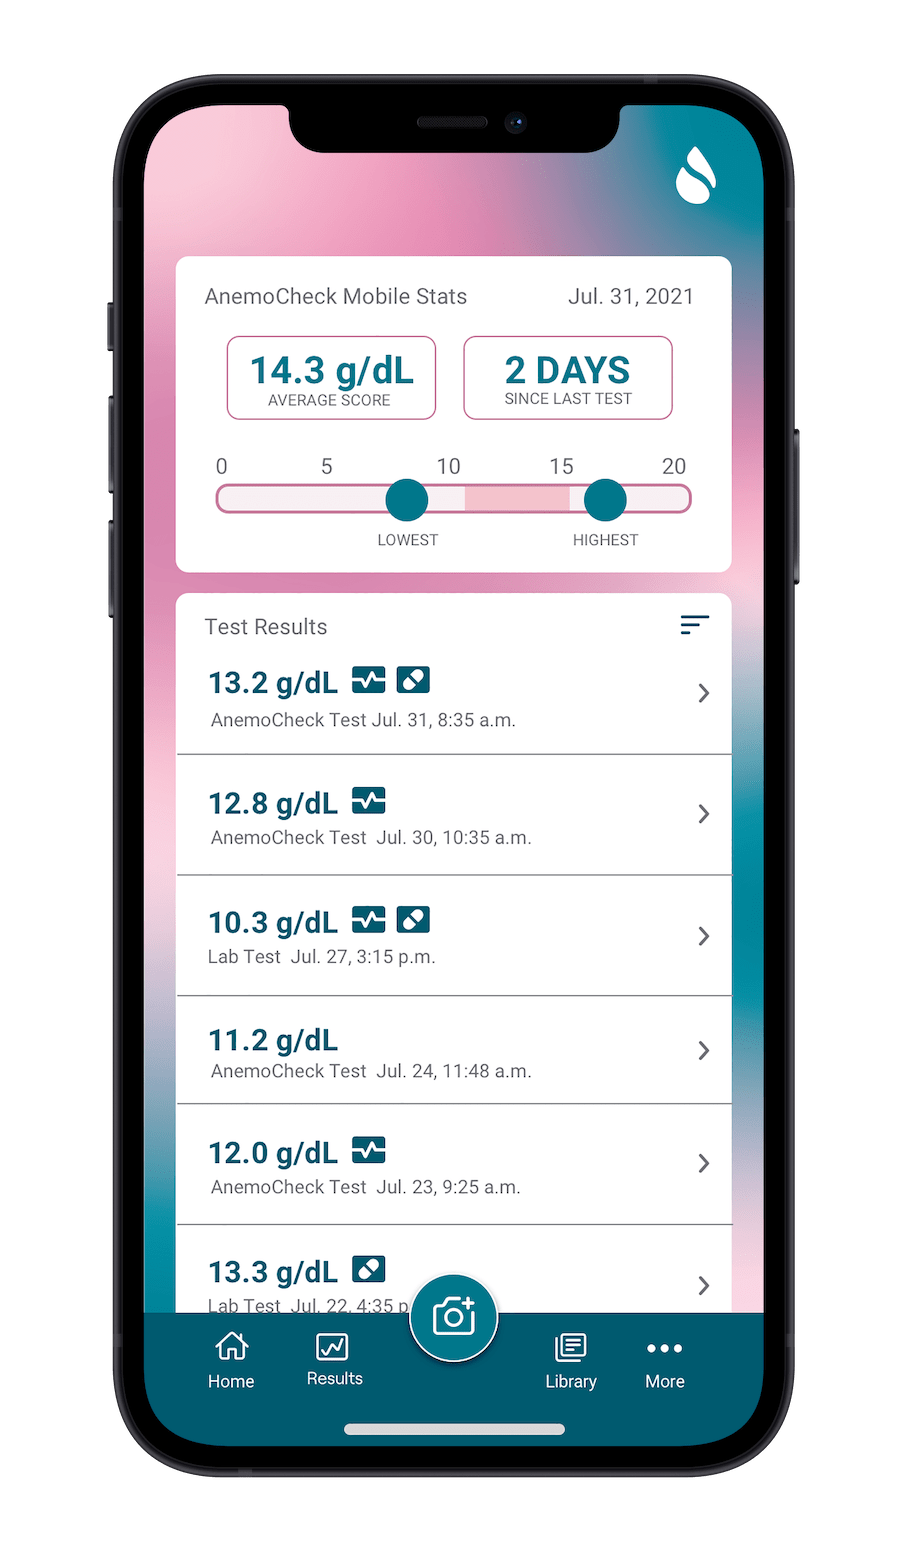 The Anemocheck Mobile app tracking screen where you can keep record of all your results